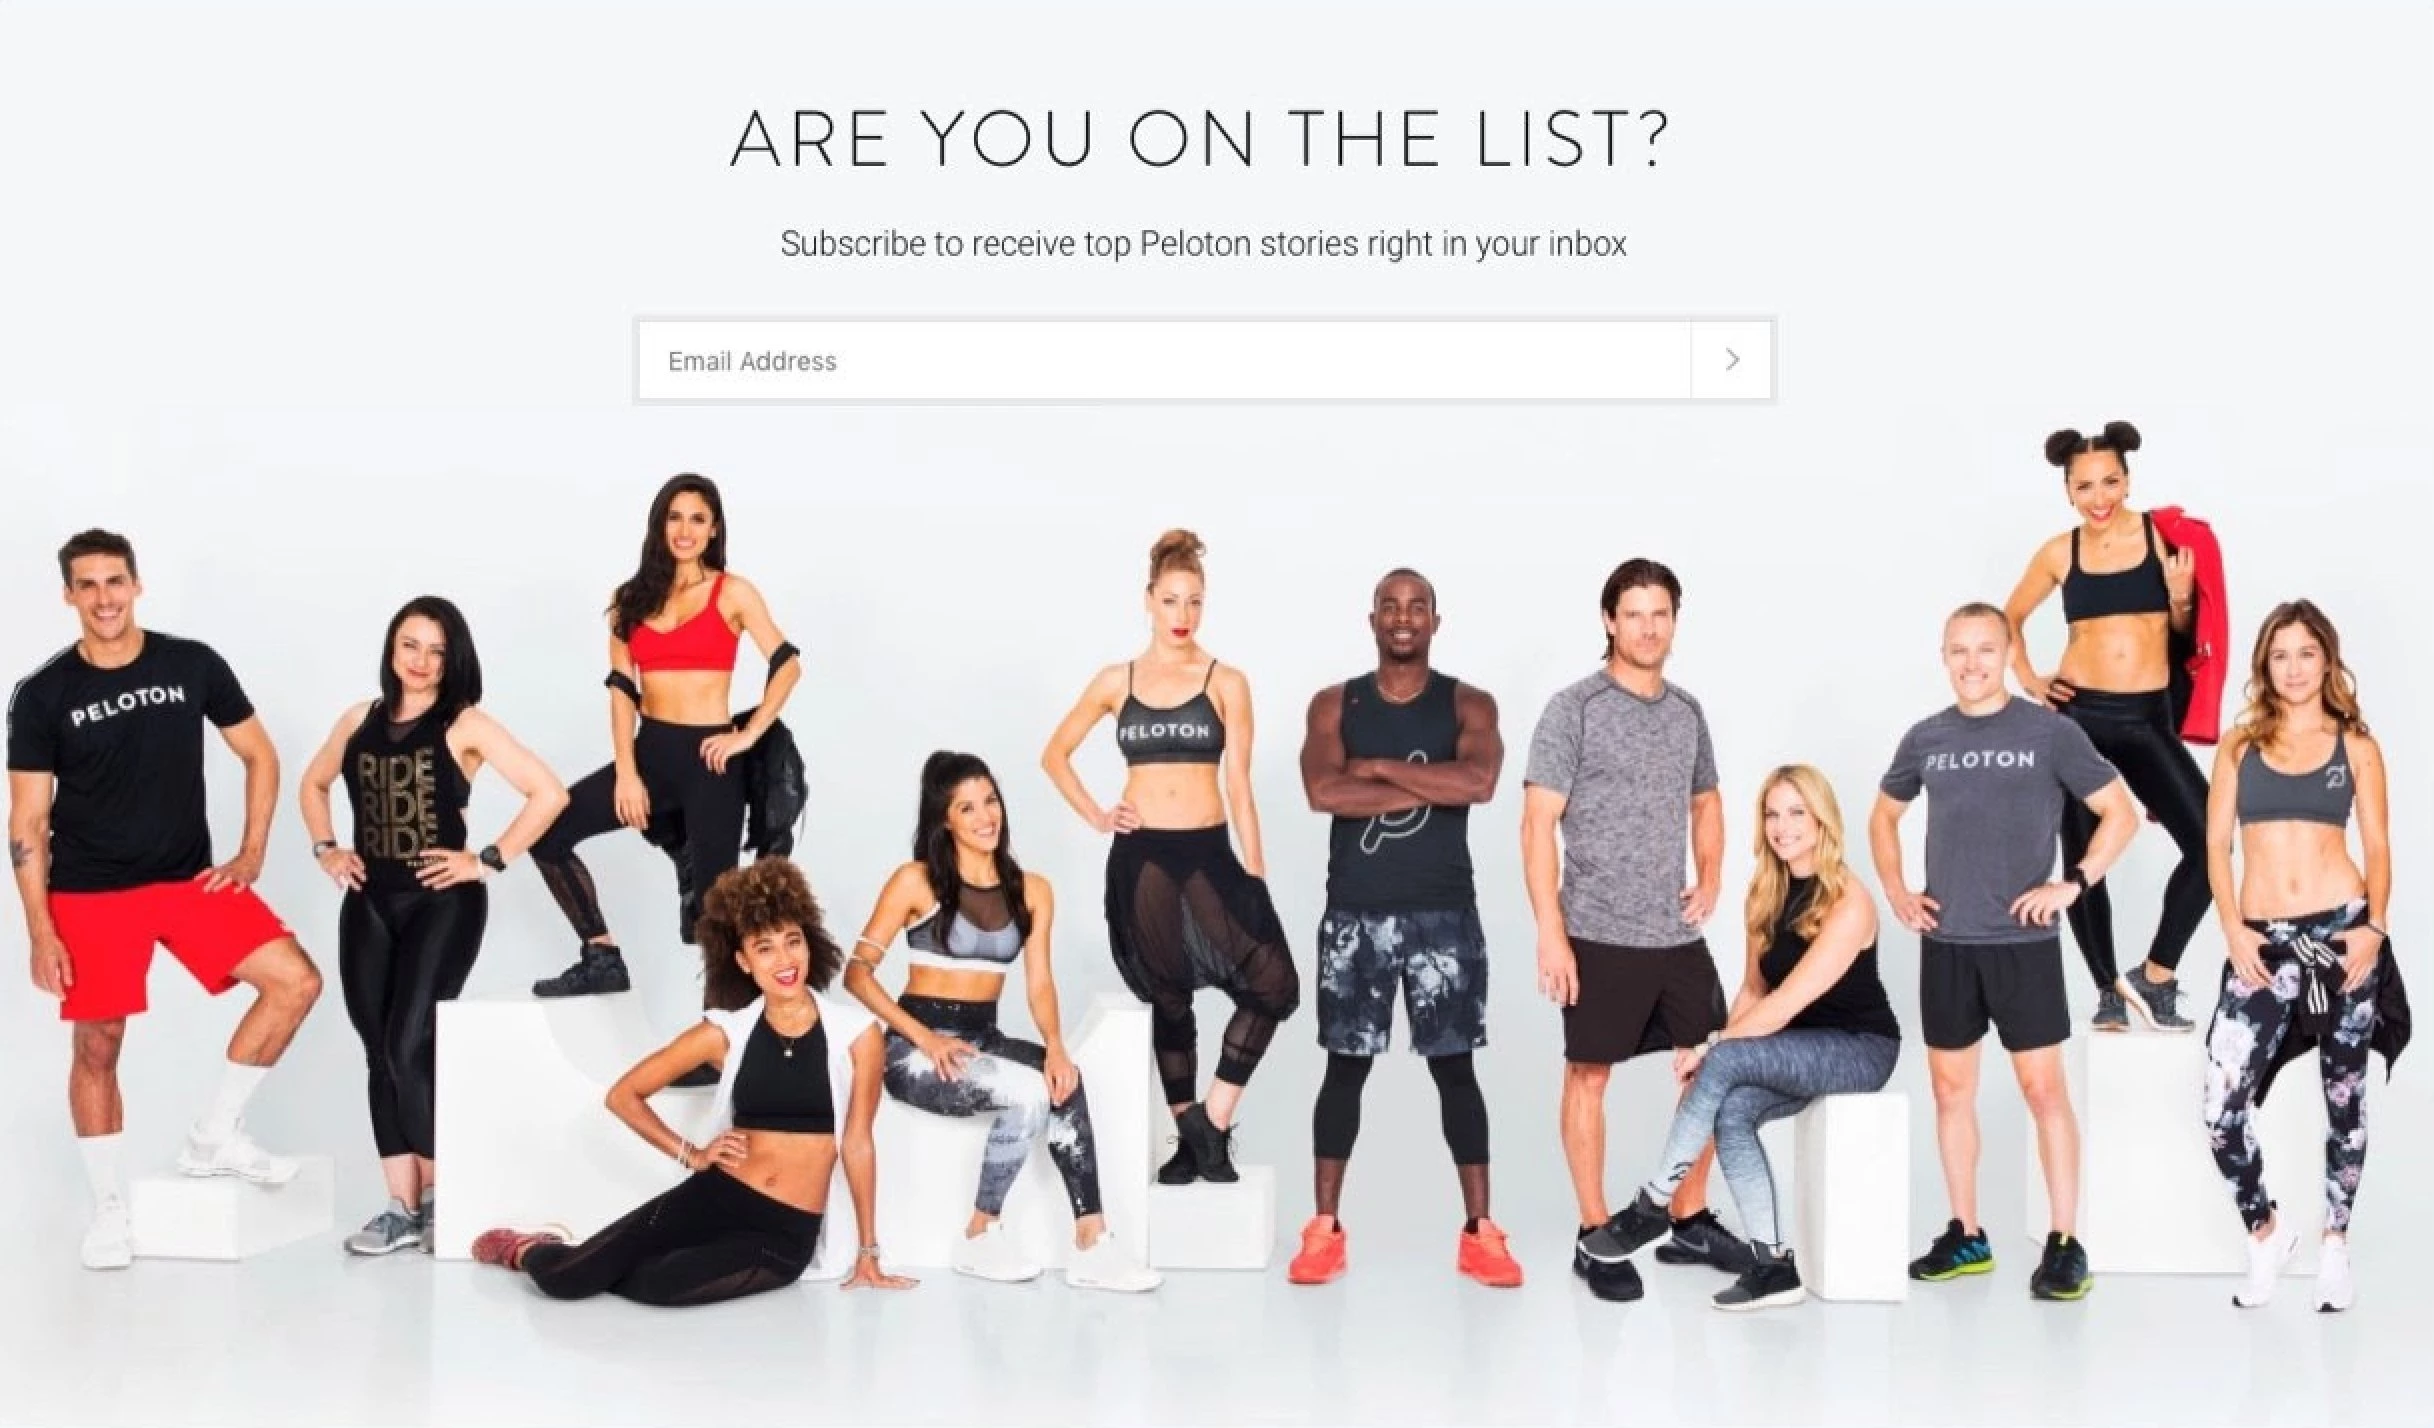 Peloton email subscription form example are you on the list